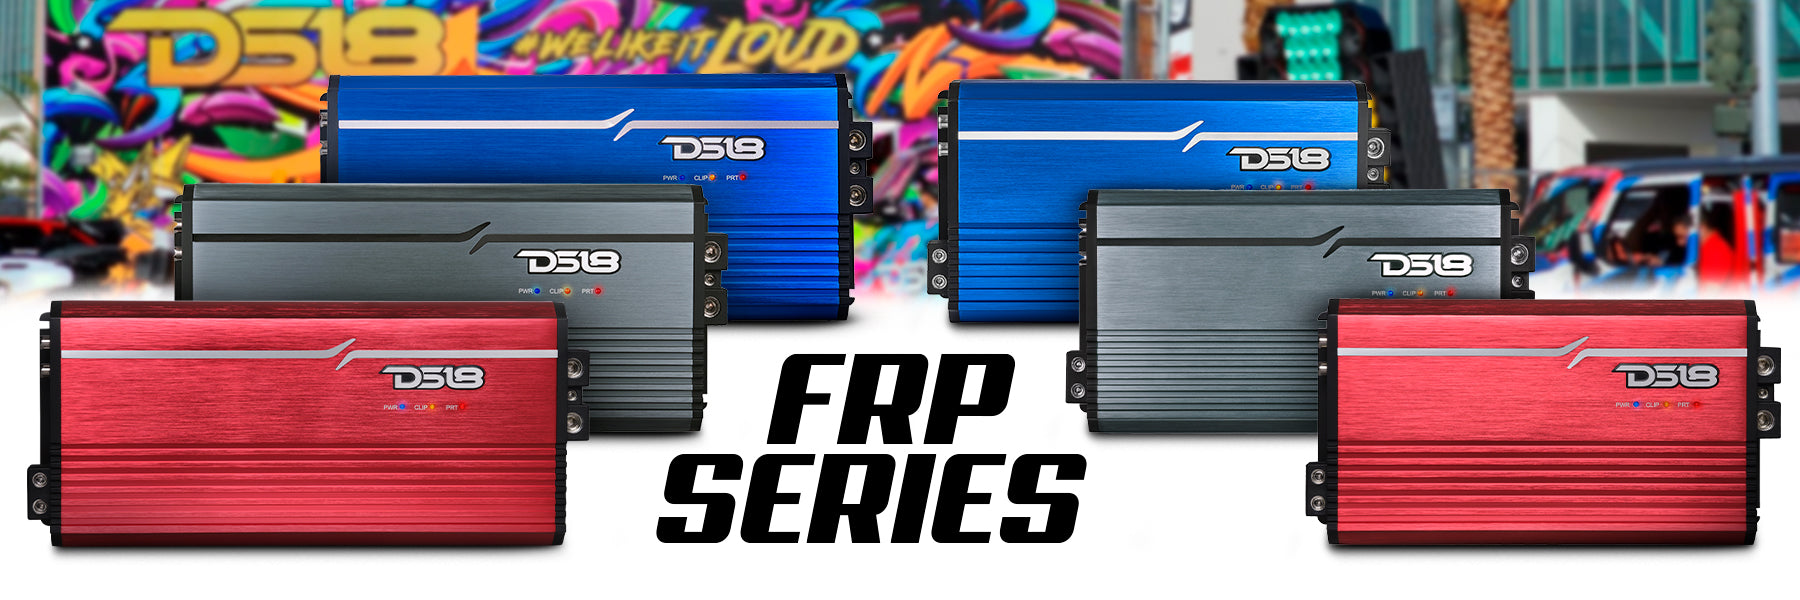 Discover DS18's Revolutionary FRP Series Amplifiers